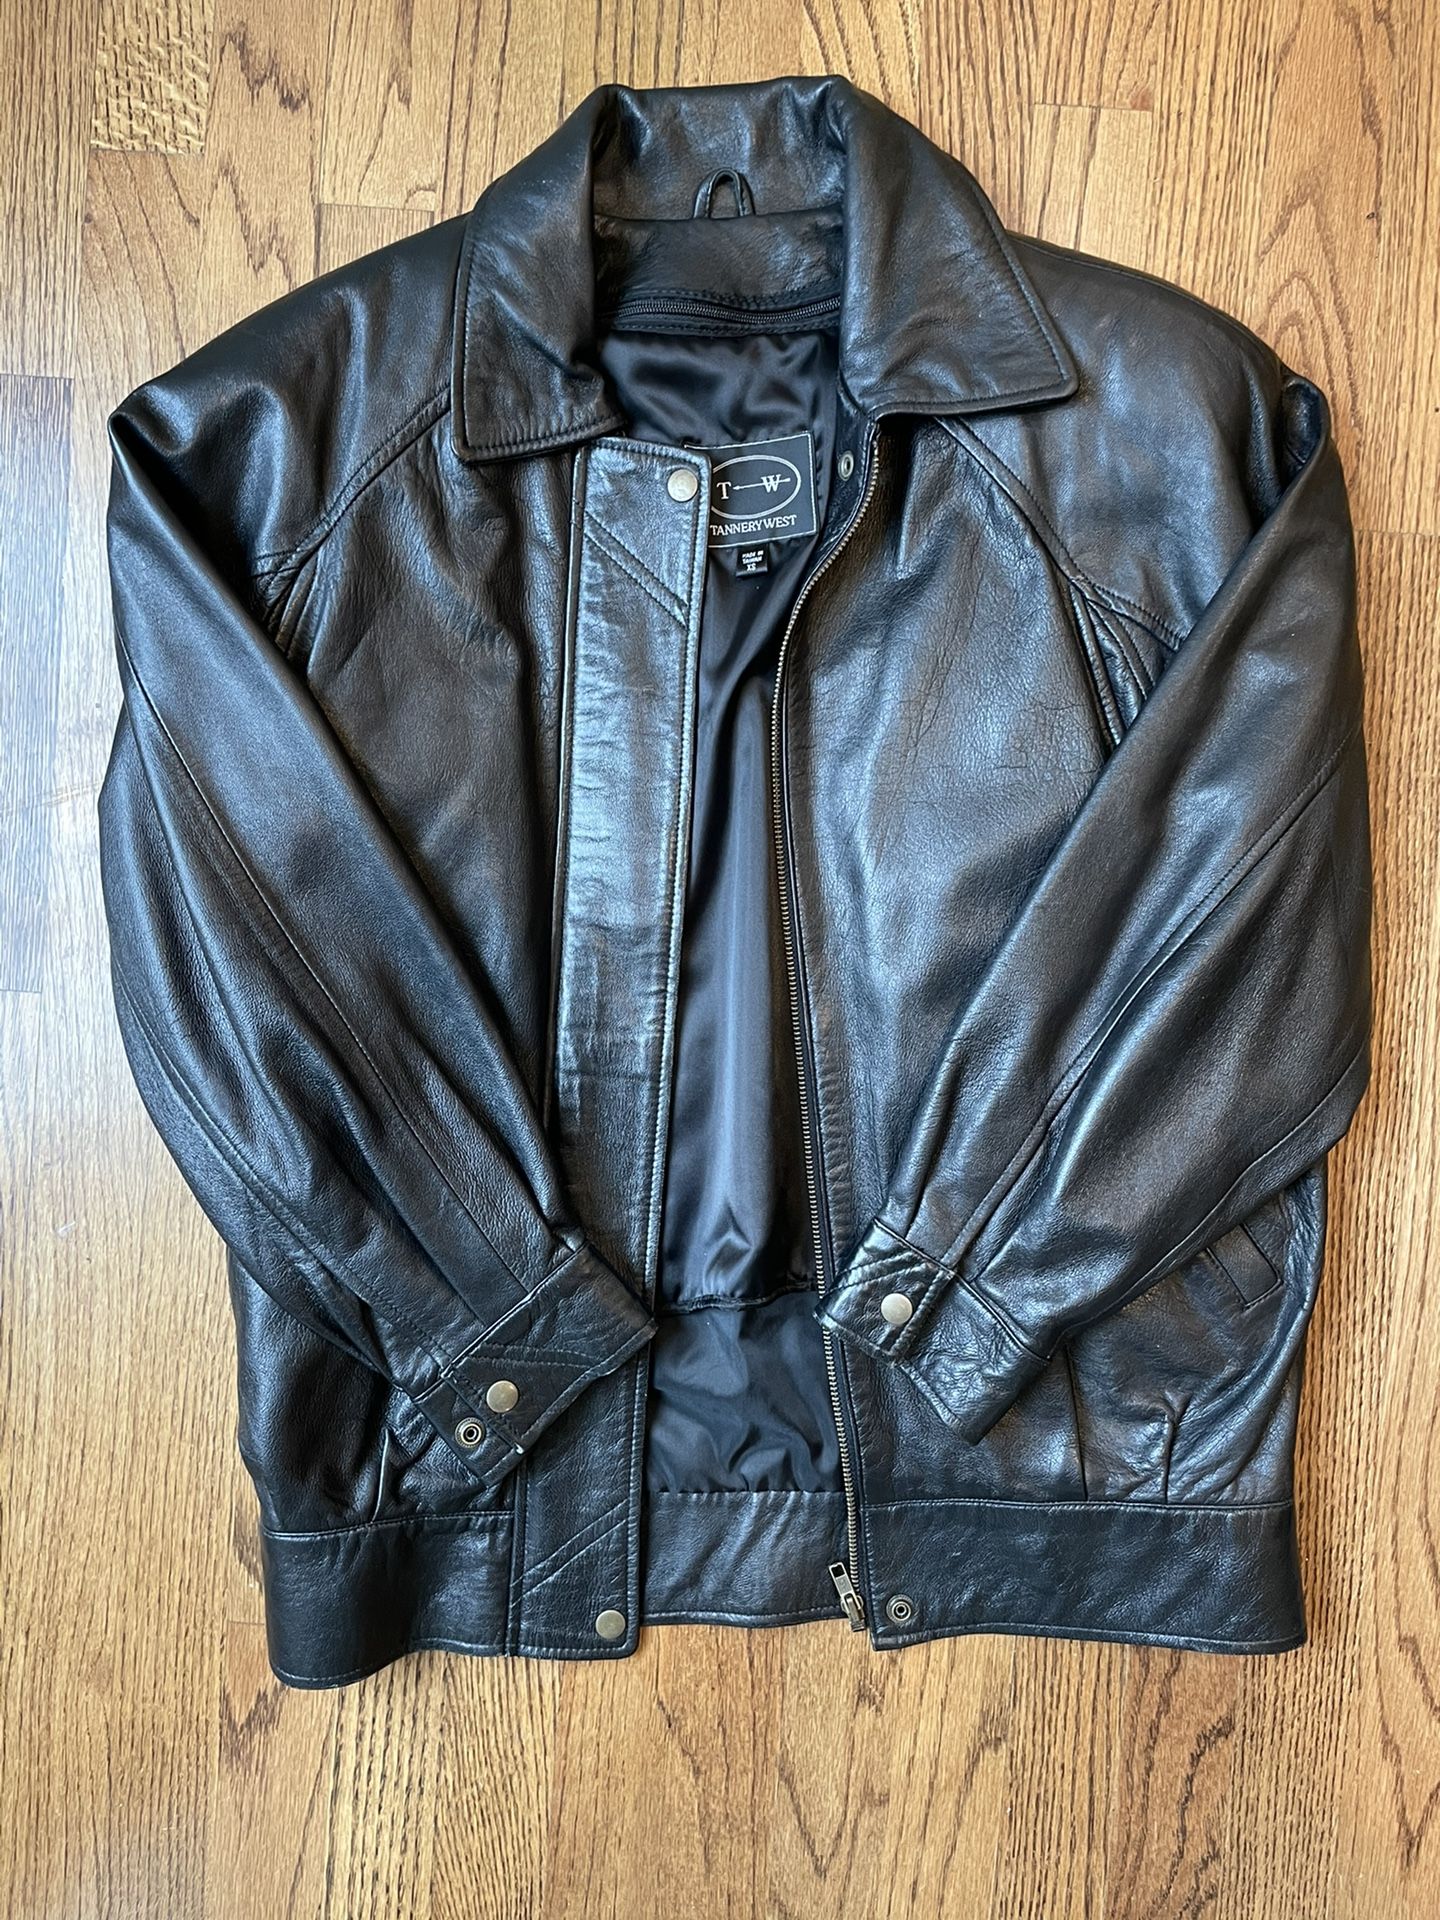 Vintage 90s Tannery West Size XS Men’s Soft Black Leather Jacket- Lightly Worn! Condition is pre owned and shows light signs of wear but overall very 